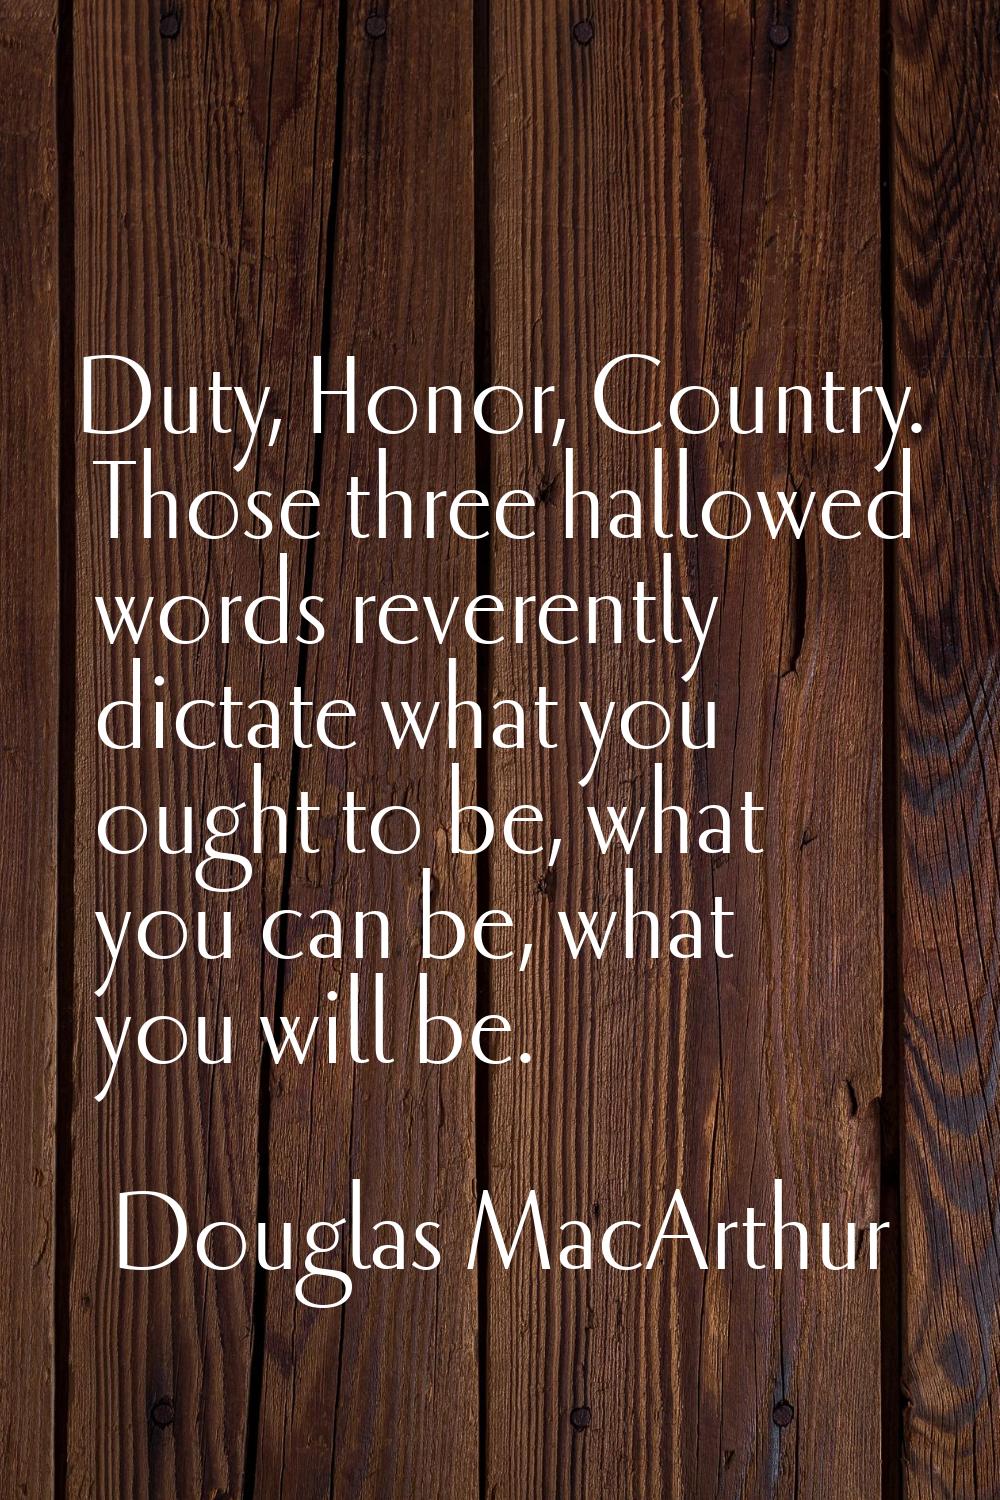 Duty, Honor, Country. Those three hallowed words reverently dictate what you ought to be, what you 